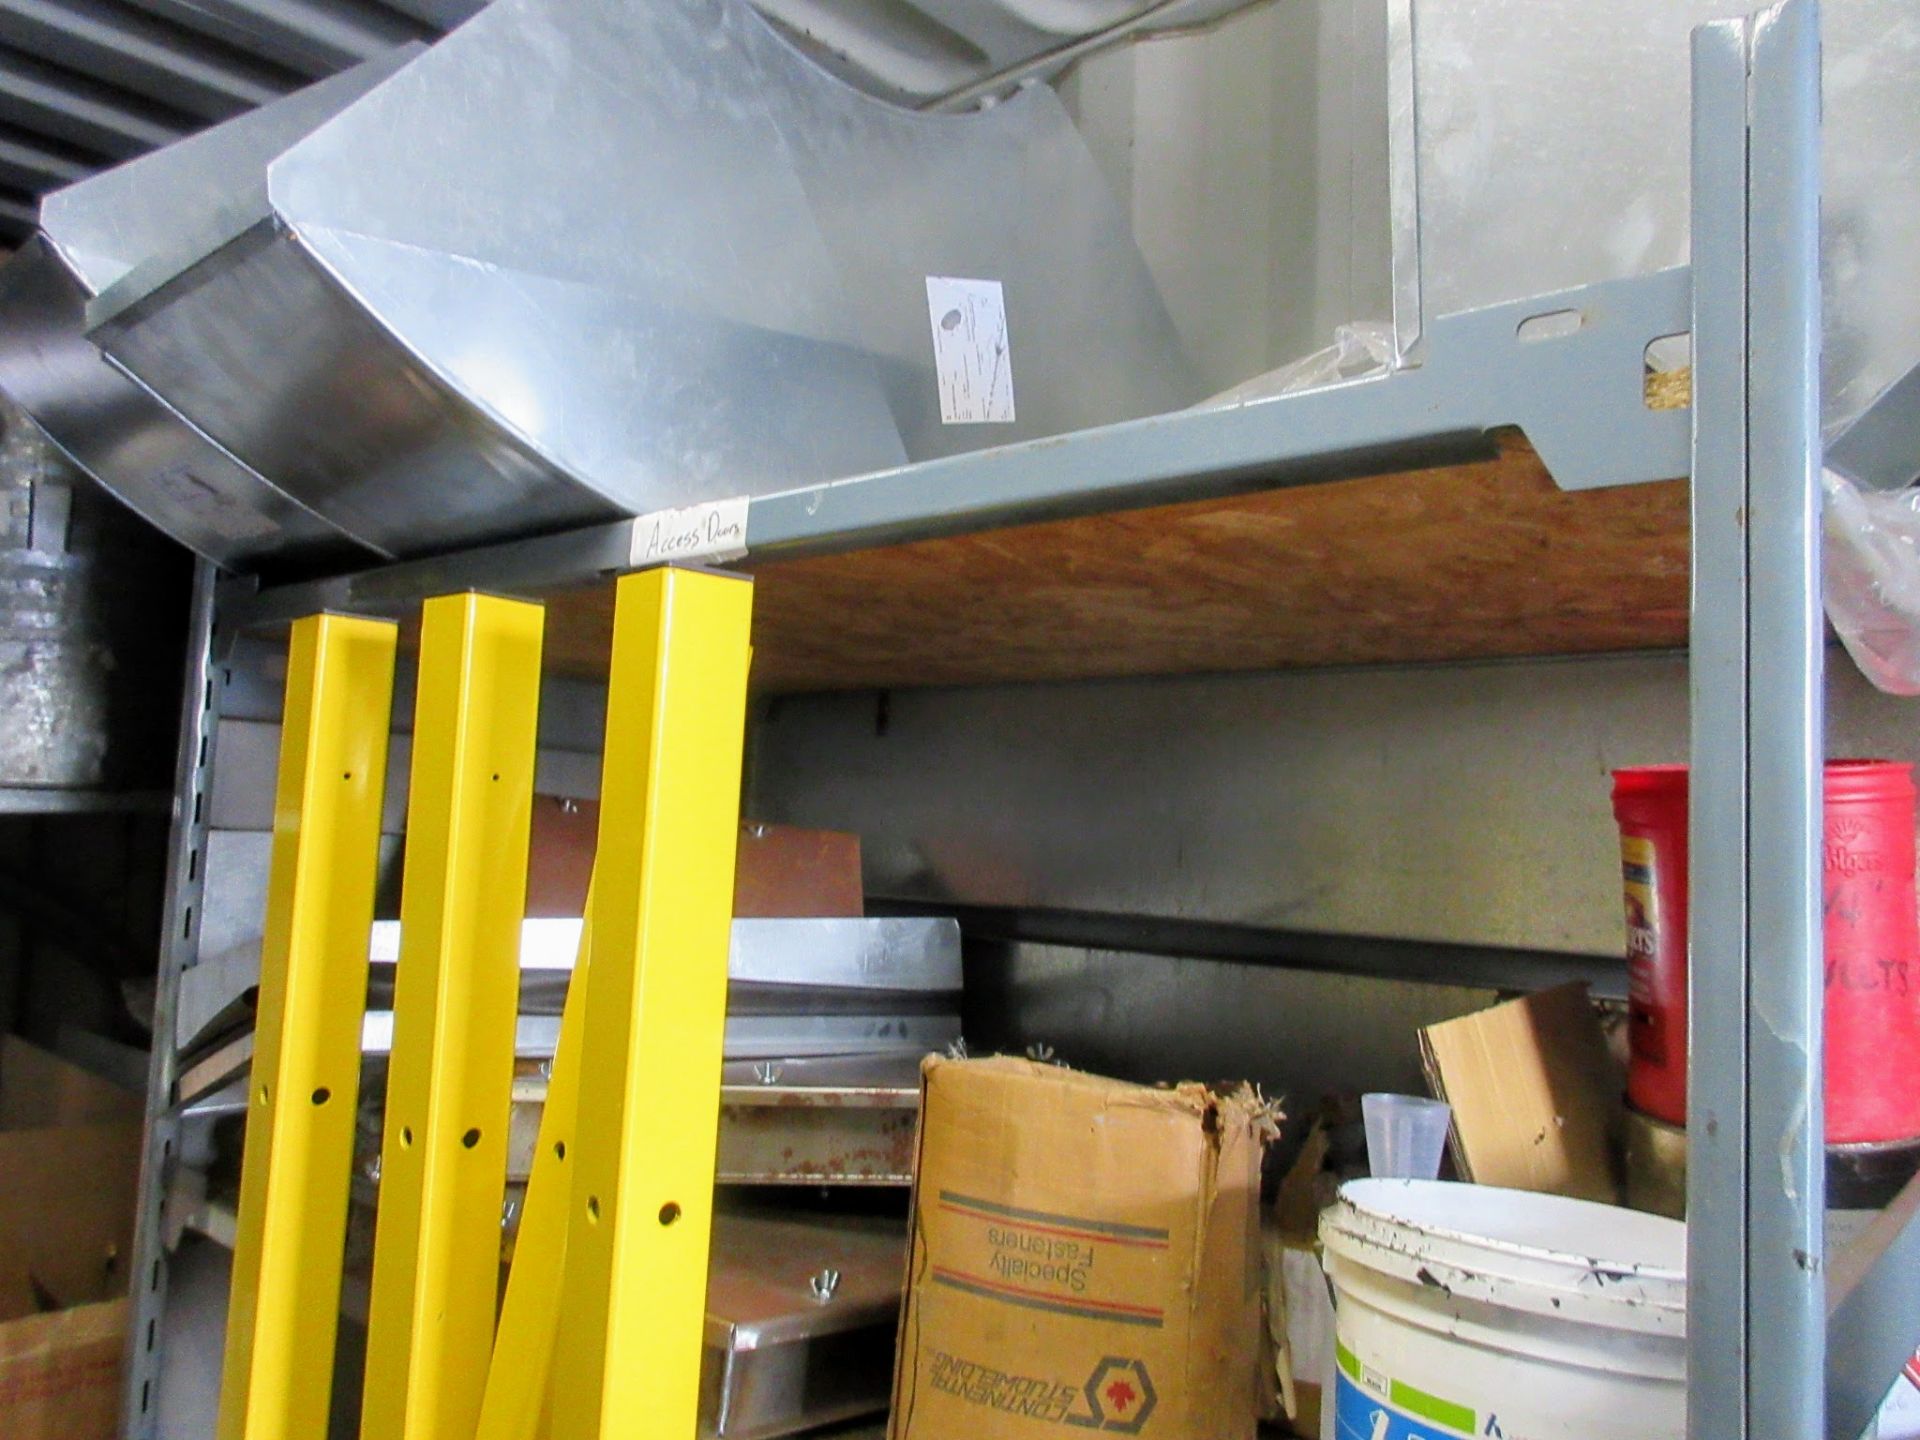 CONTENTS OF 20' SEACAN INCLUDING HVAC / DUCTWORK COMPONENTS, SUPPLIES, (4) U-LINE POSTS, ETC. - Image 8 of 11